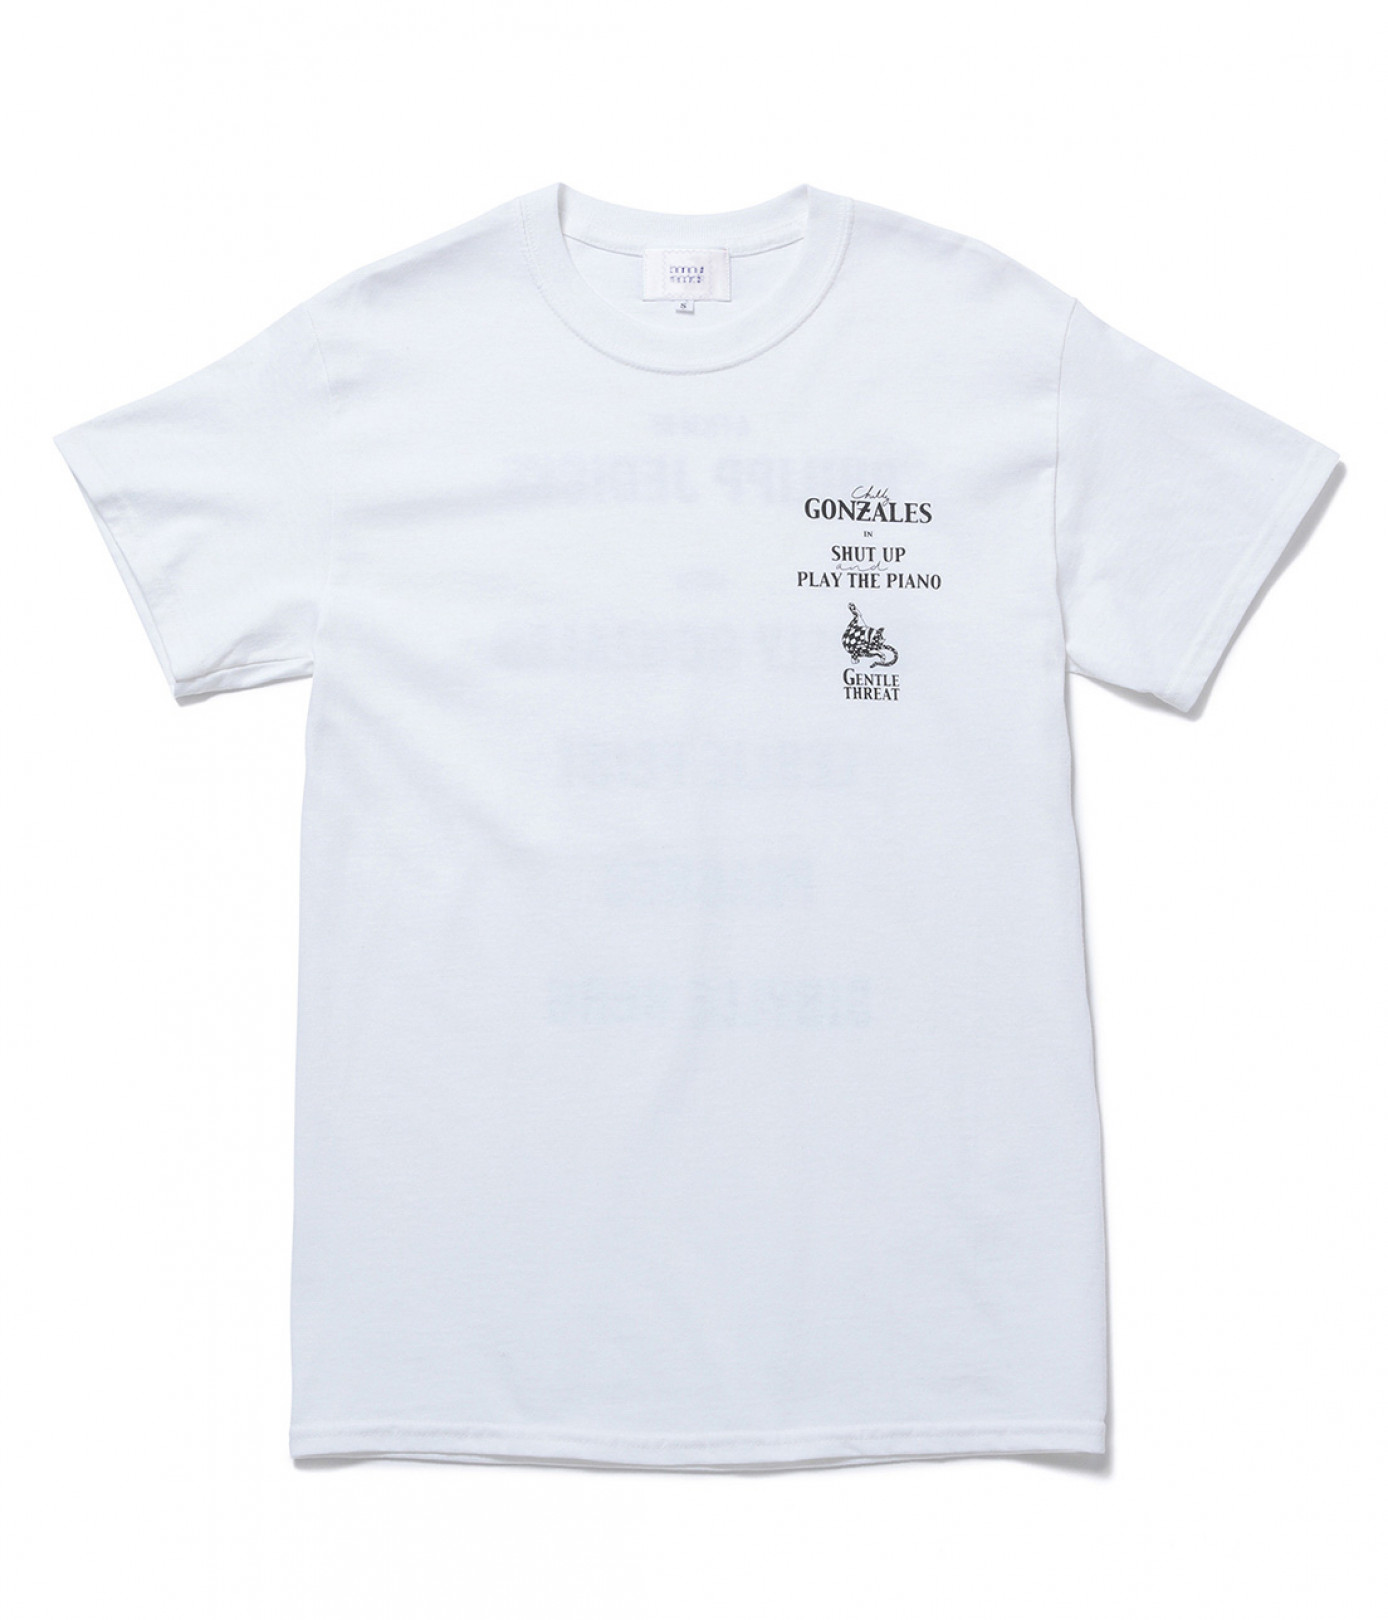 「SHUT UP AND PLAY THE PIANO TEE」（5,800円）